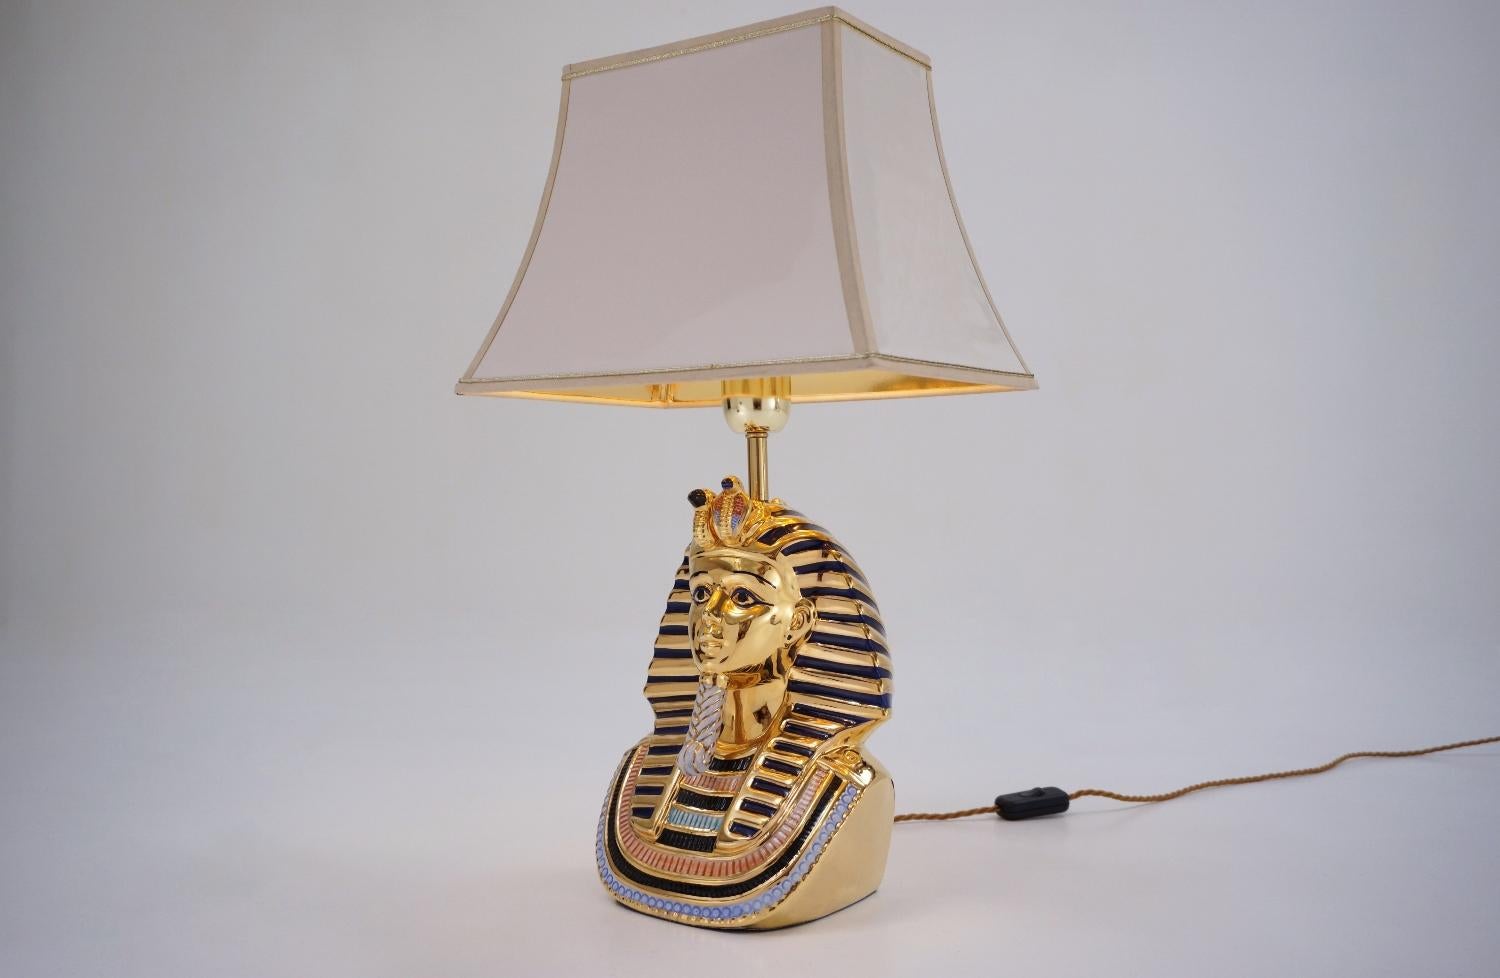 Tutankhamun lamp painted and gilt ceramic, Italian, circa 1970s. Although not signed this lamp has many of the features of the work of Vittorio Sabadin.

This table lamp has been gently cleaned while respecting the vintage patina. It is newly